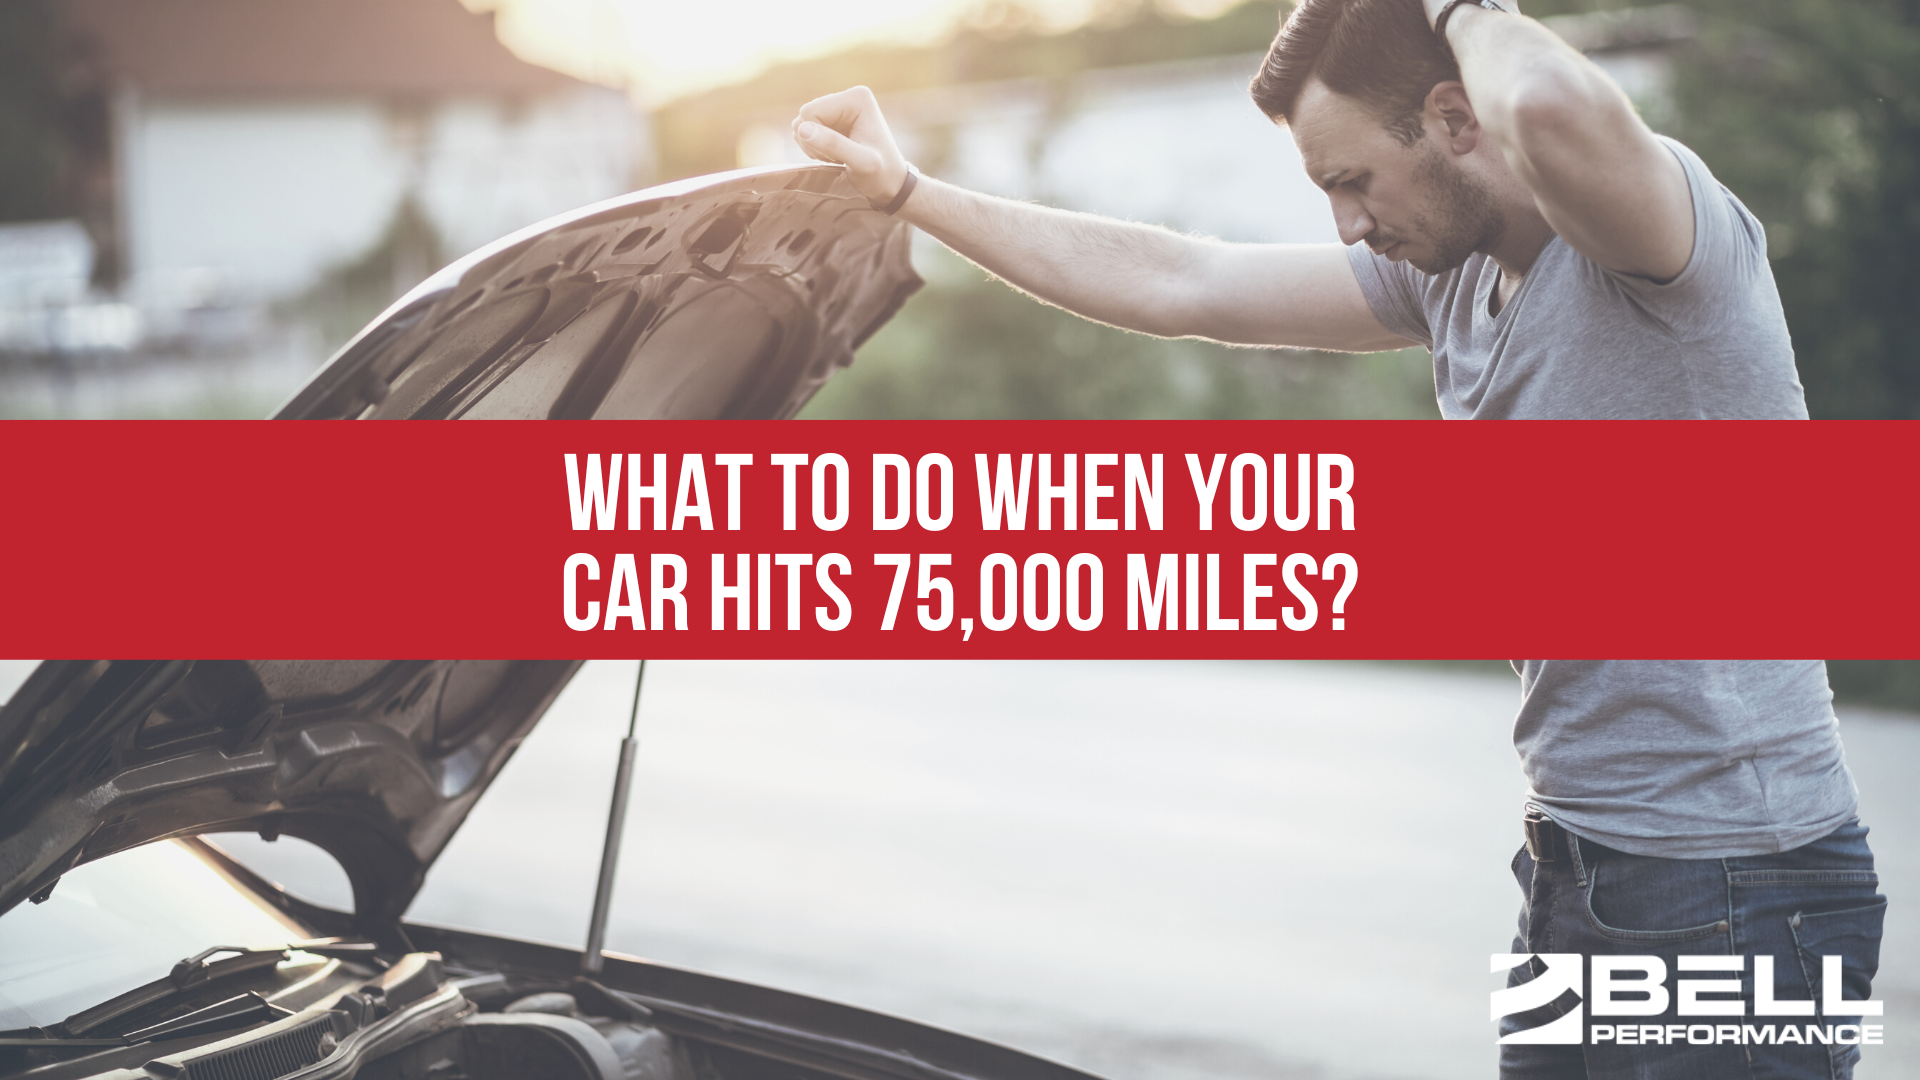 What To Do When Your Car Hits 75,000 Miles?